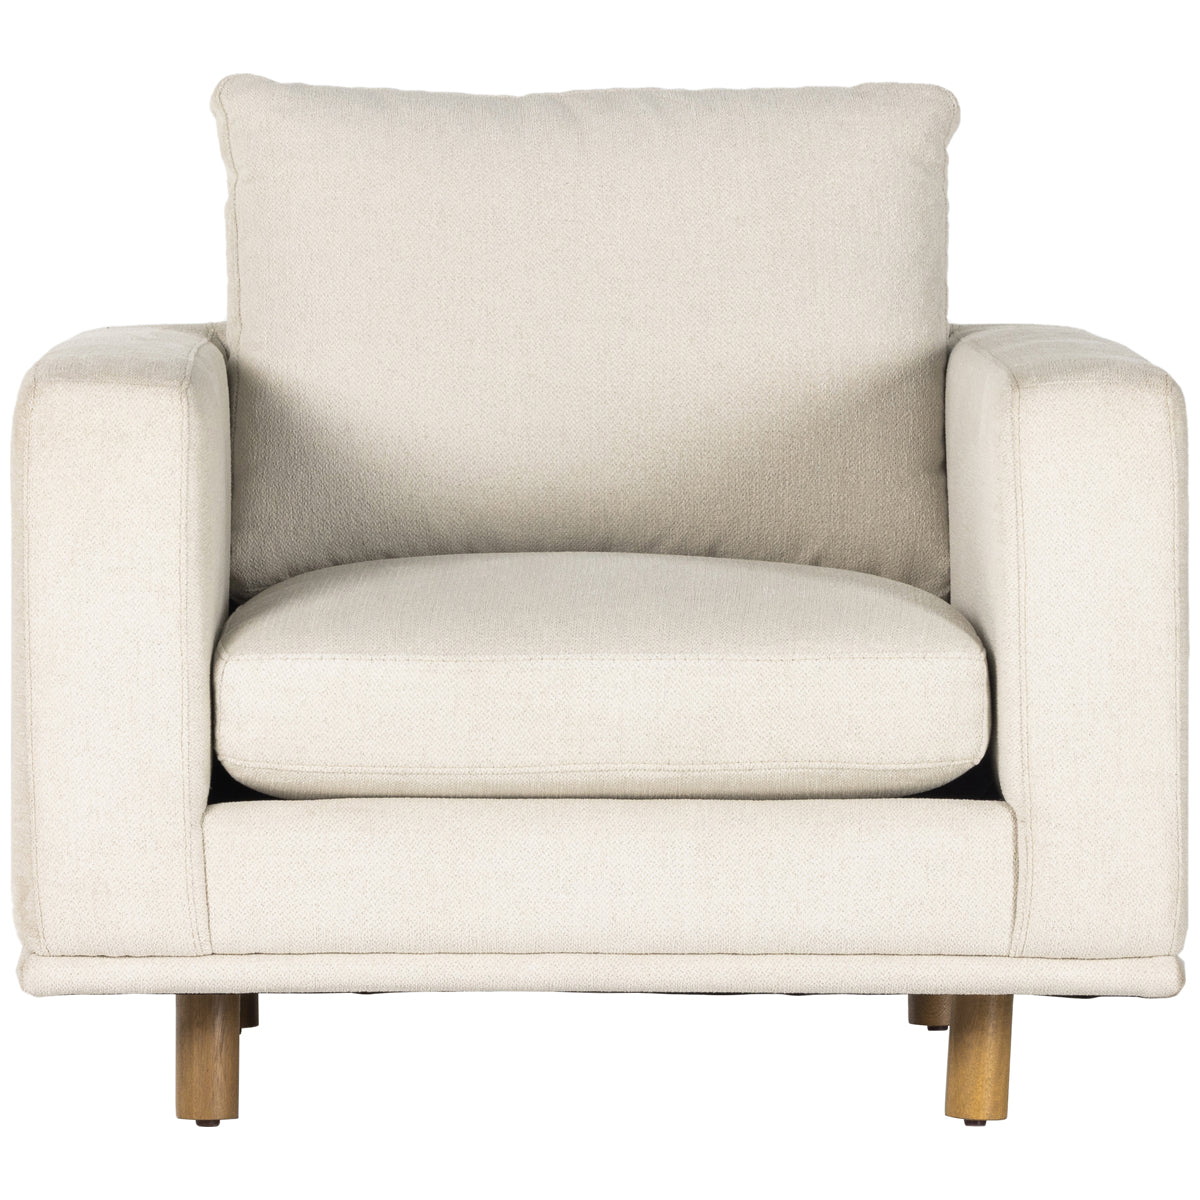 Four Hands Centrale Dom Chair - Bonnell Ivory